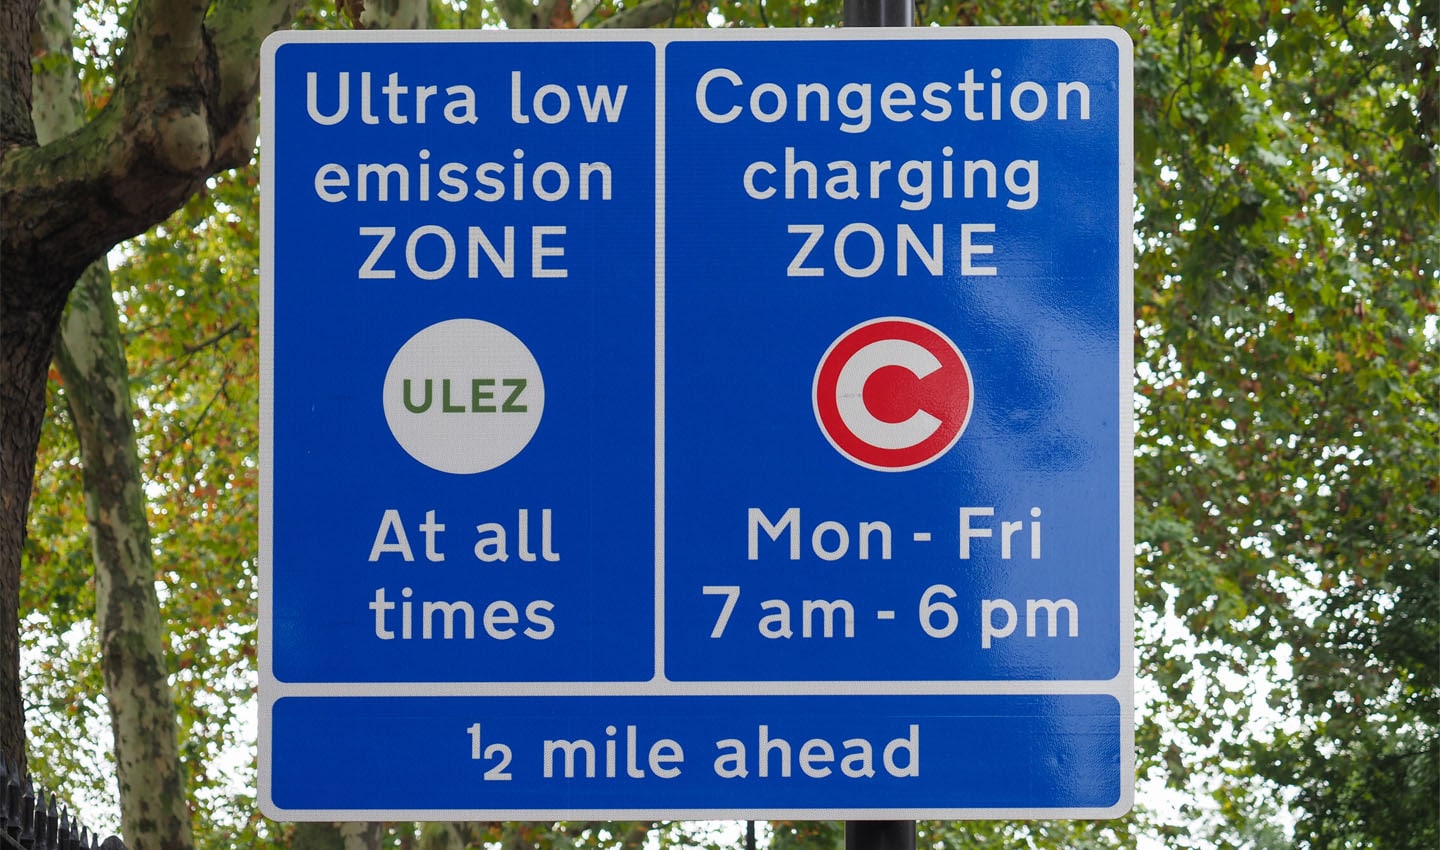 London’s Ultra-Low Emission Zone prevents the most polluting vehicles from entering the city center.